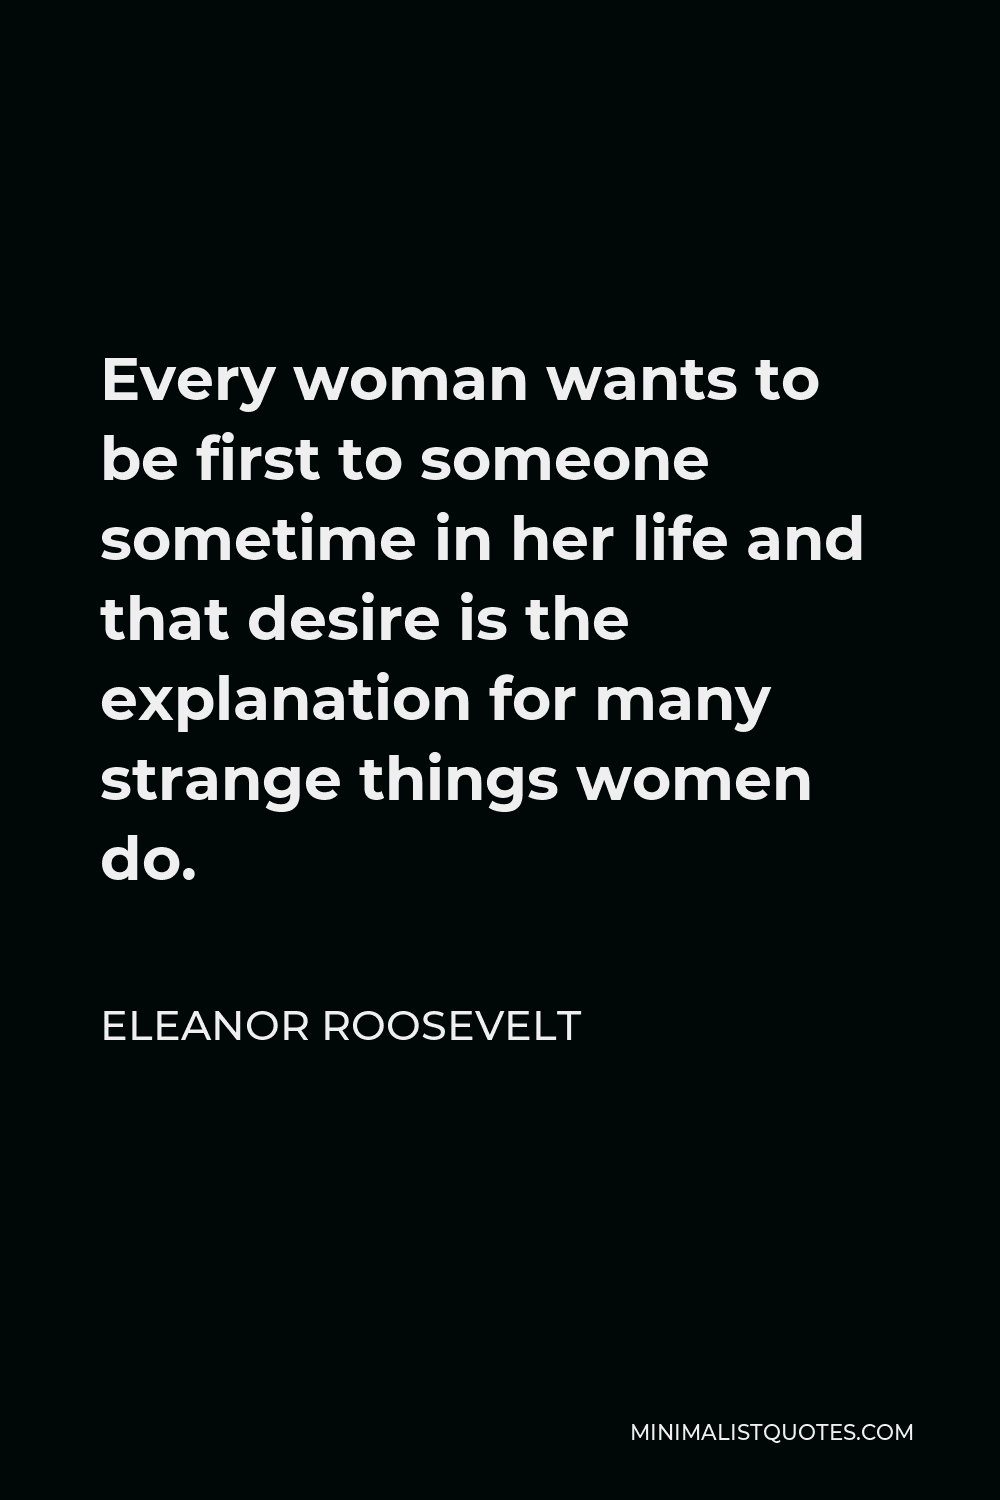 Eleanor Roosevelt Quote - Every woman wants to be first to someone sometime in her life and that desire is the explanation for many strange things women do.